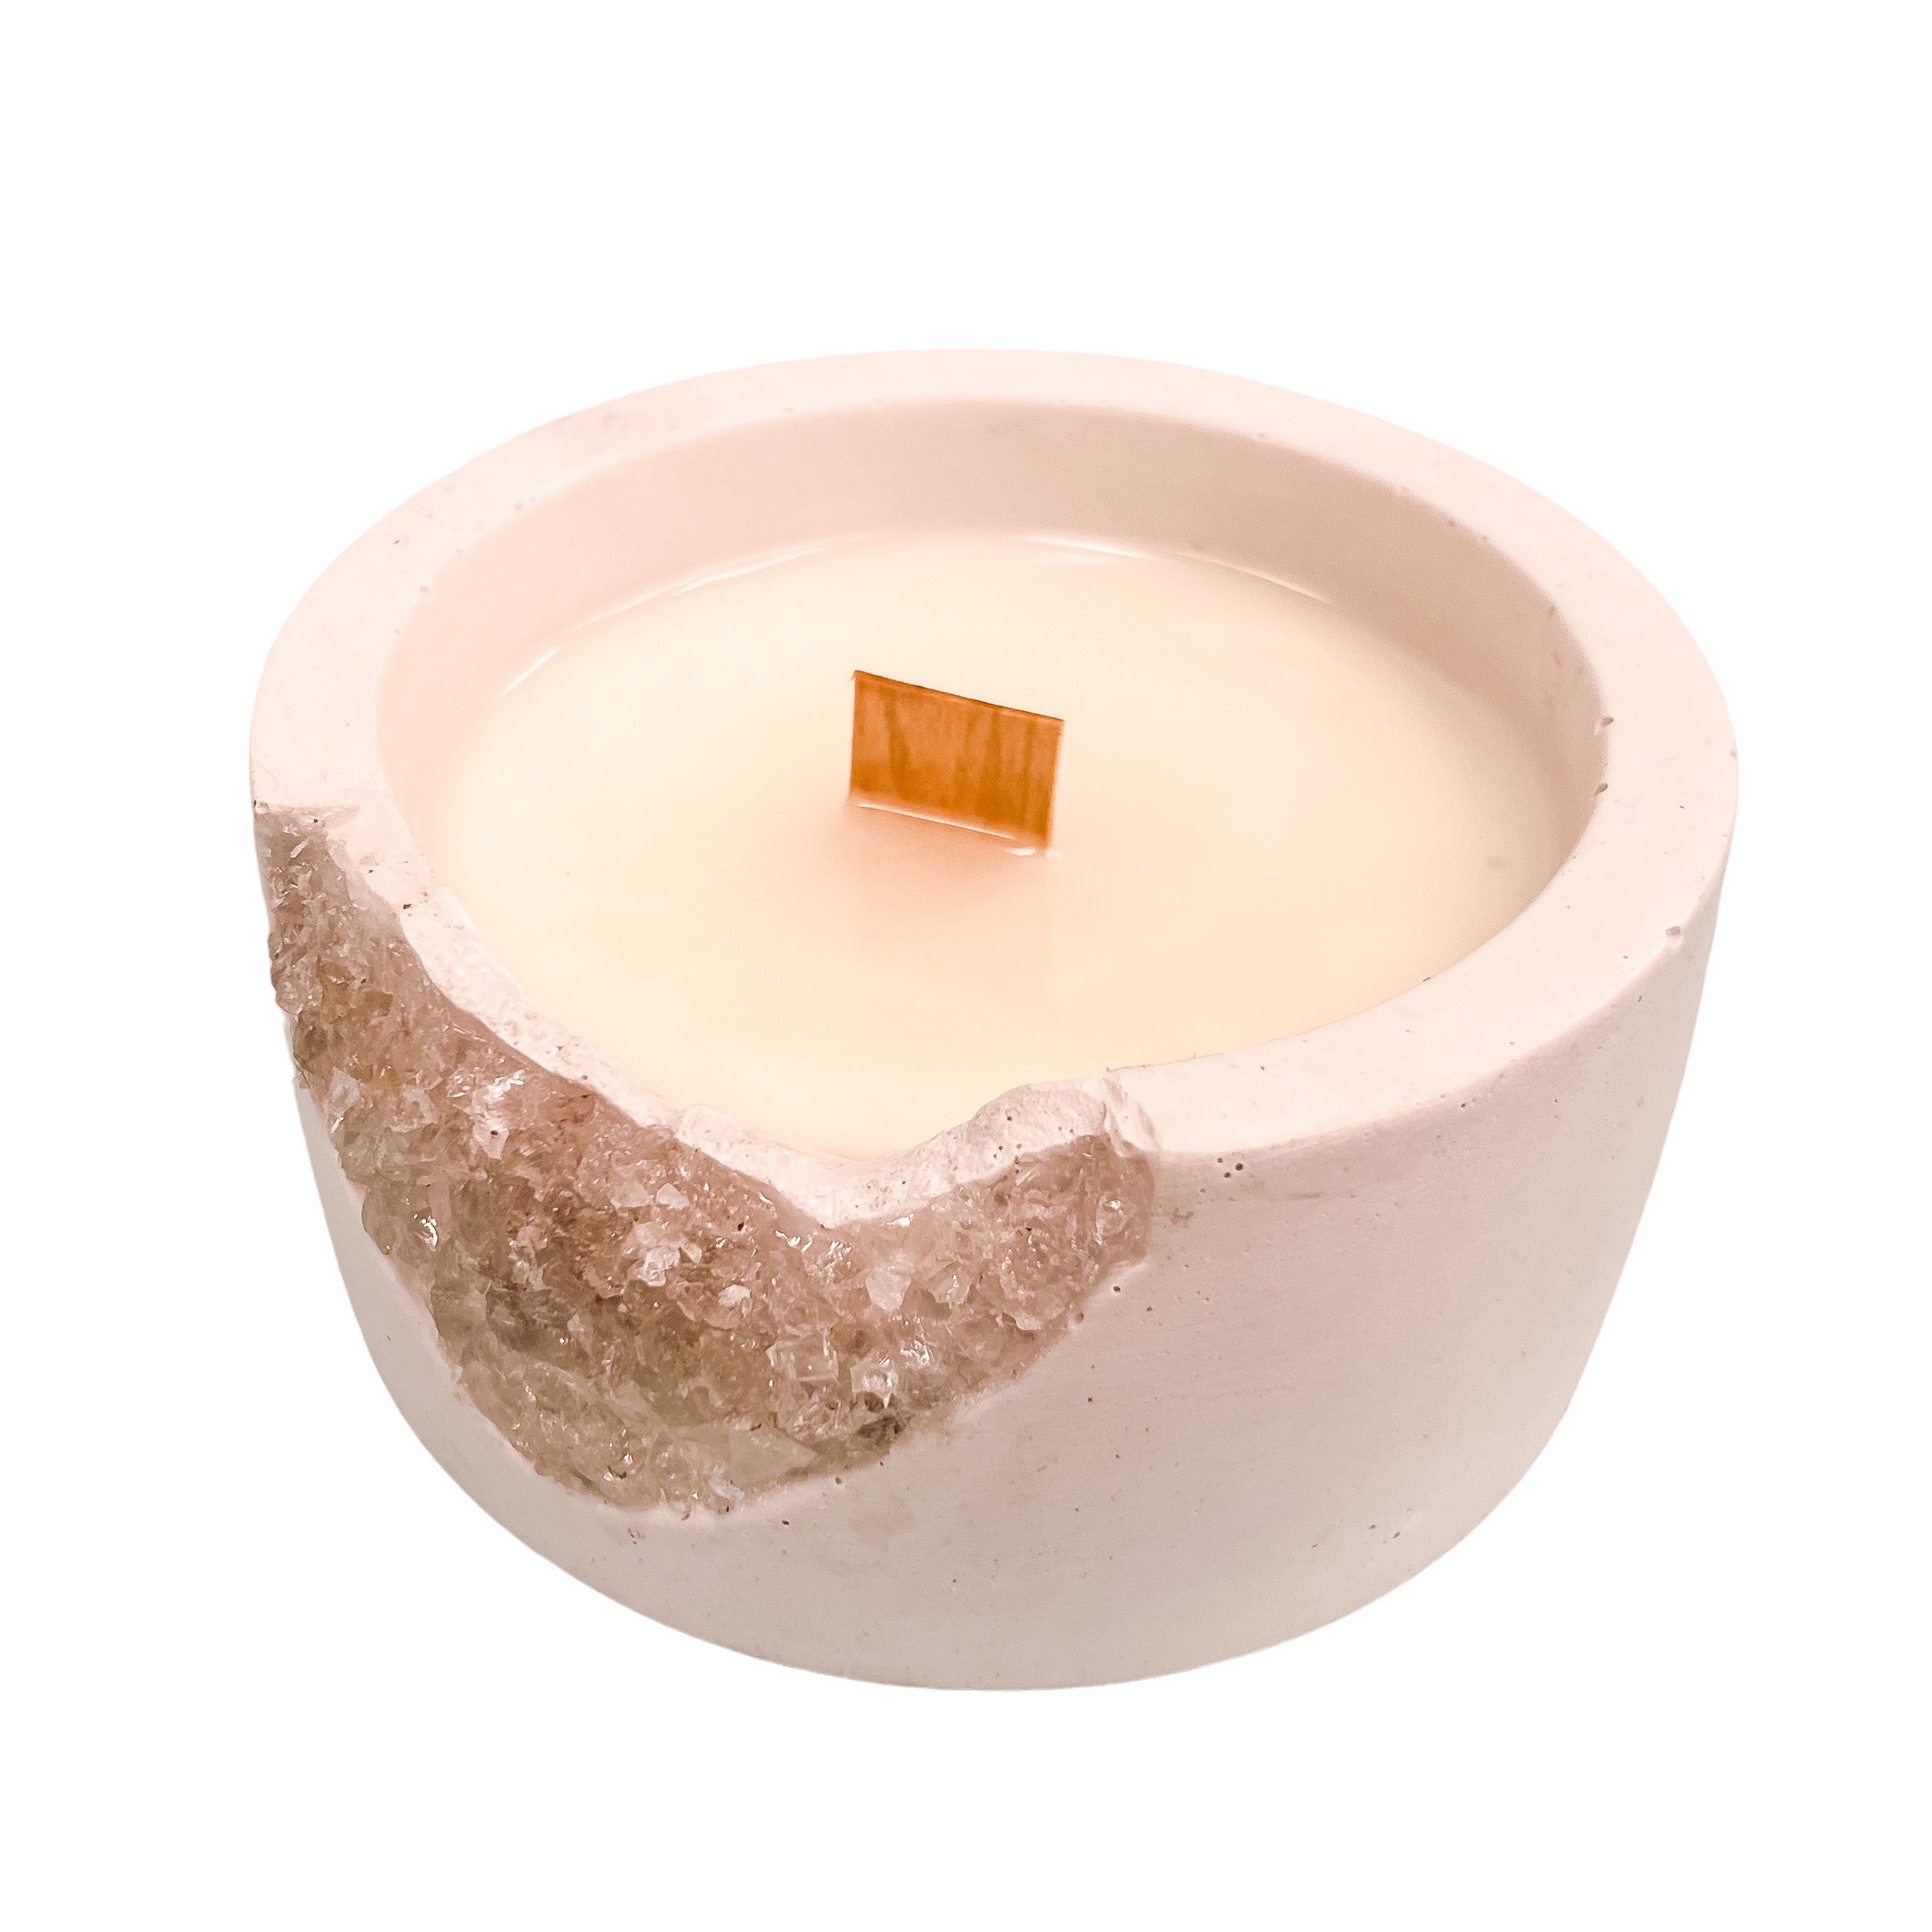 Cashmere Candle